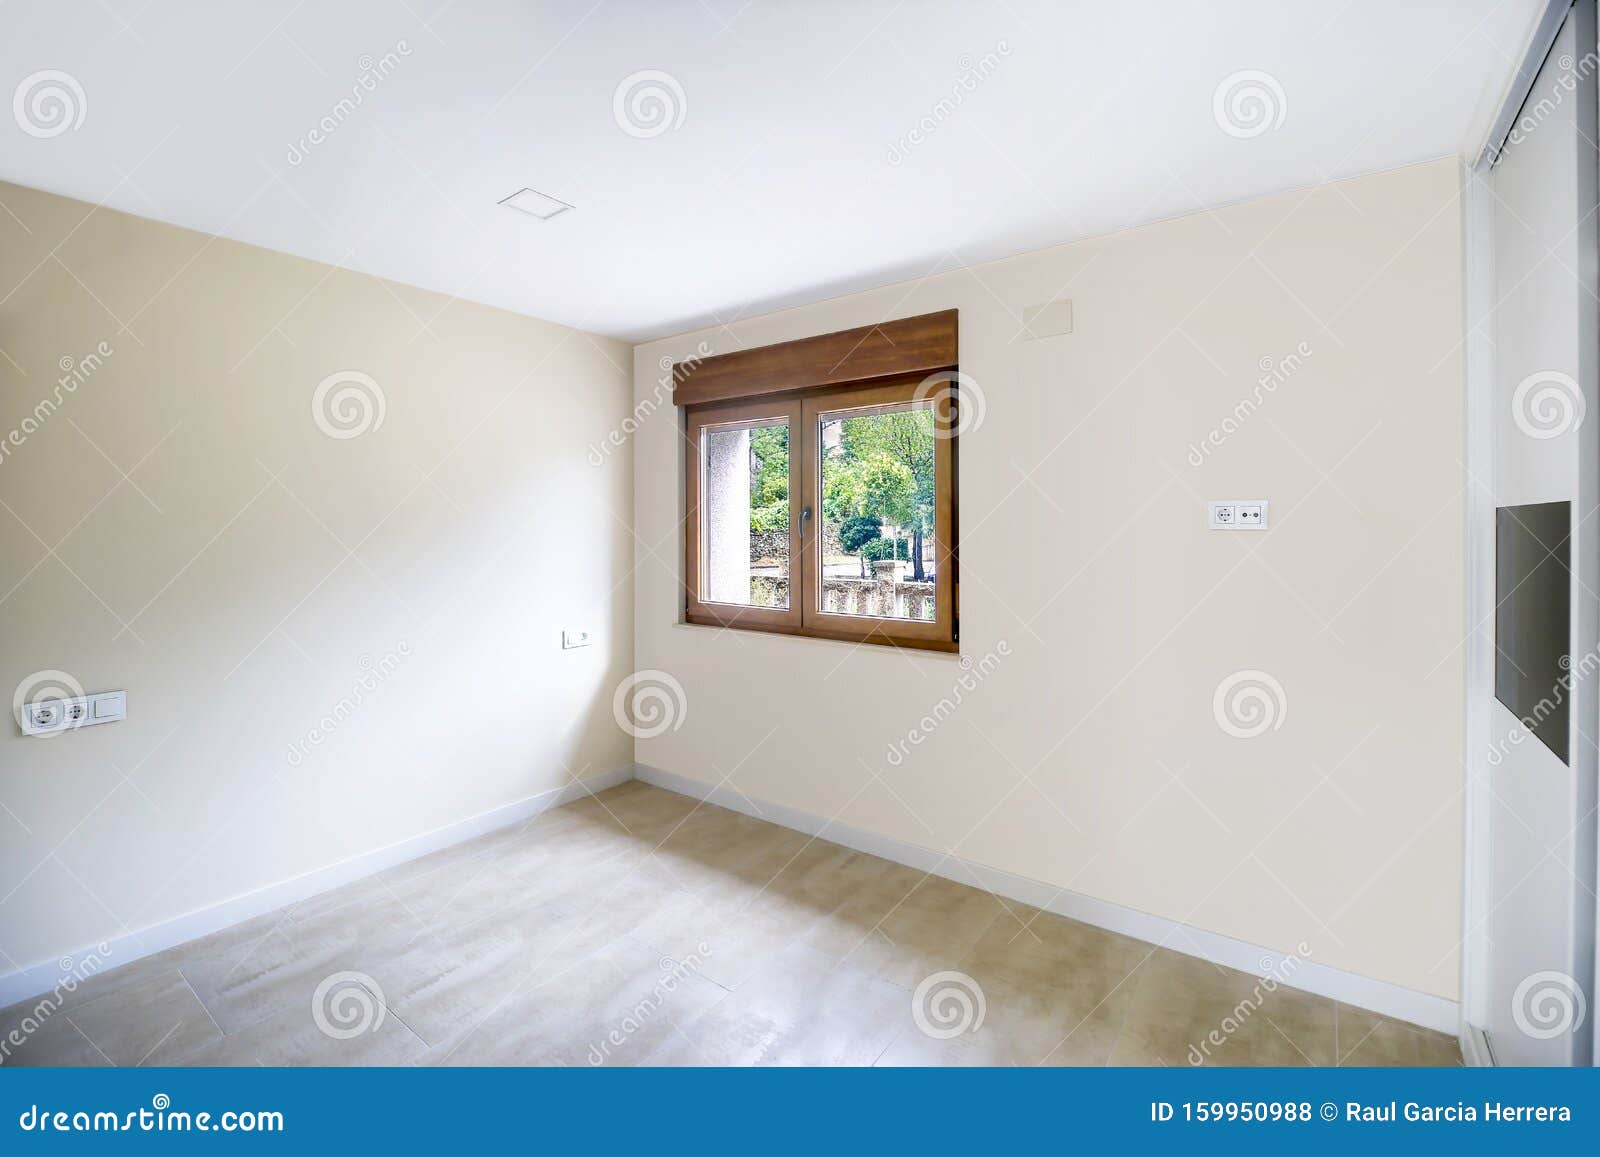 New Beautiful Empty Room With Built In Wardrobes Interior